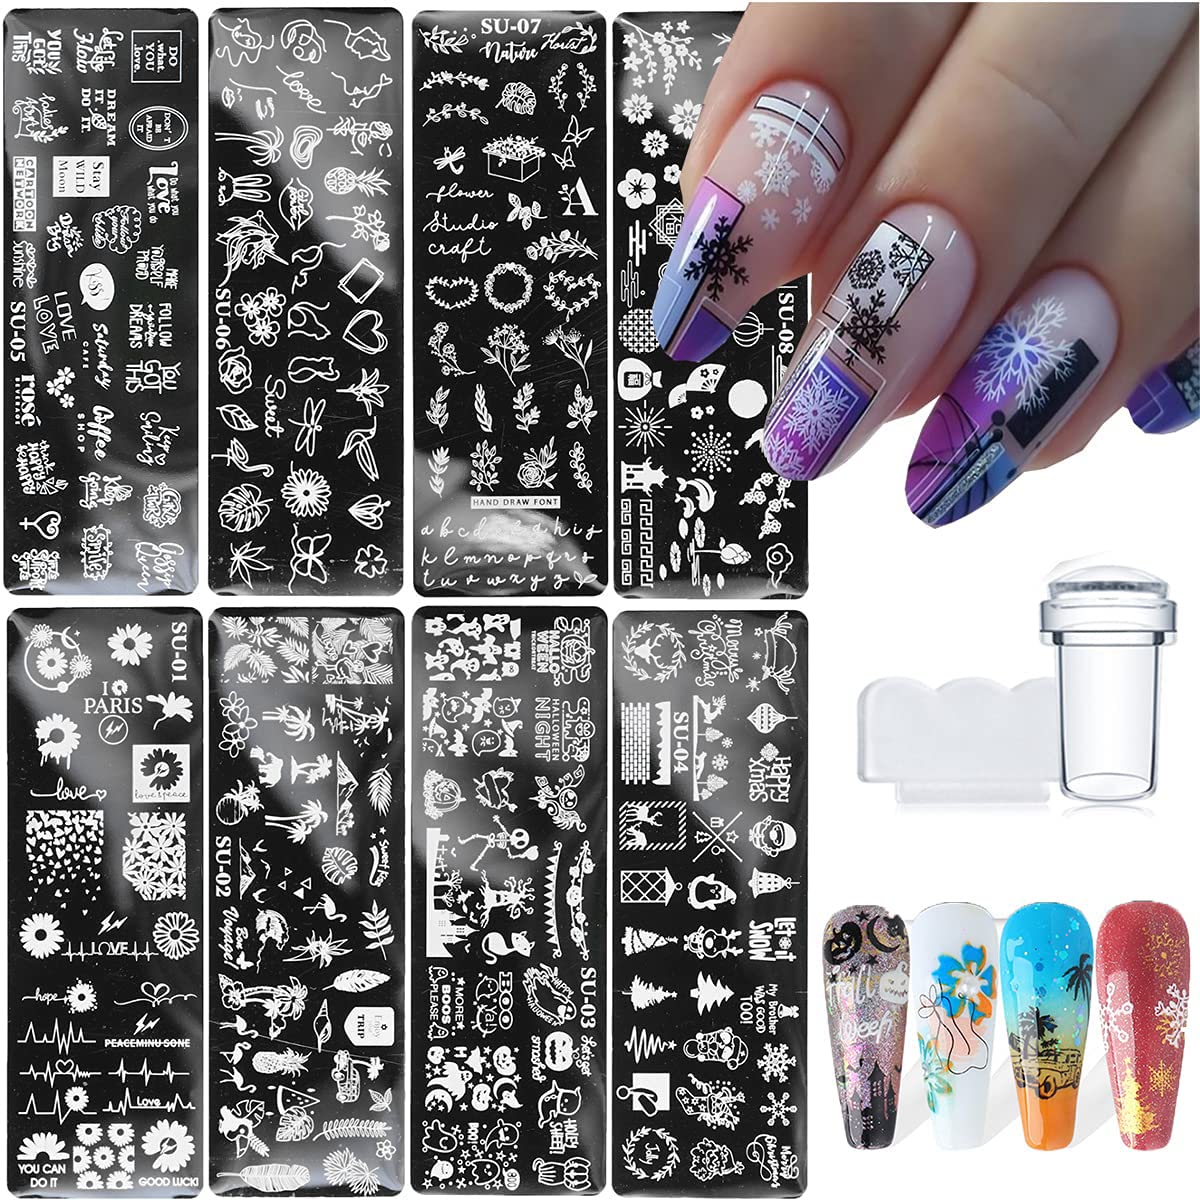 ARAA PAVA Soft Silicone Jelly Nail Stamper Scraper Nail Art Tool Nail Art  Stamper with Scraper Nail Stamping Head with A Lid Big Scraper for DIY Nail  Art Stamping Plates : Amazon.in: